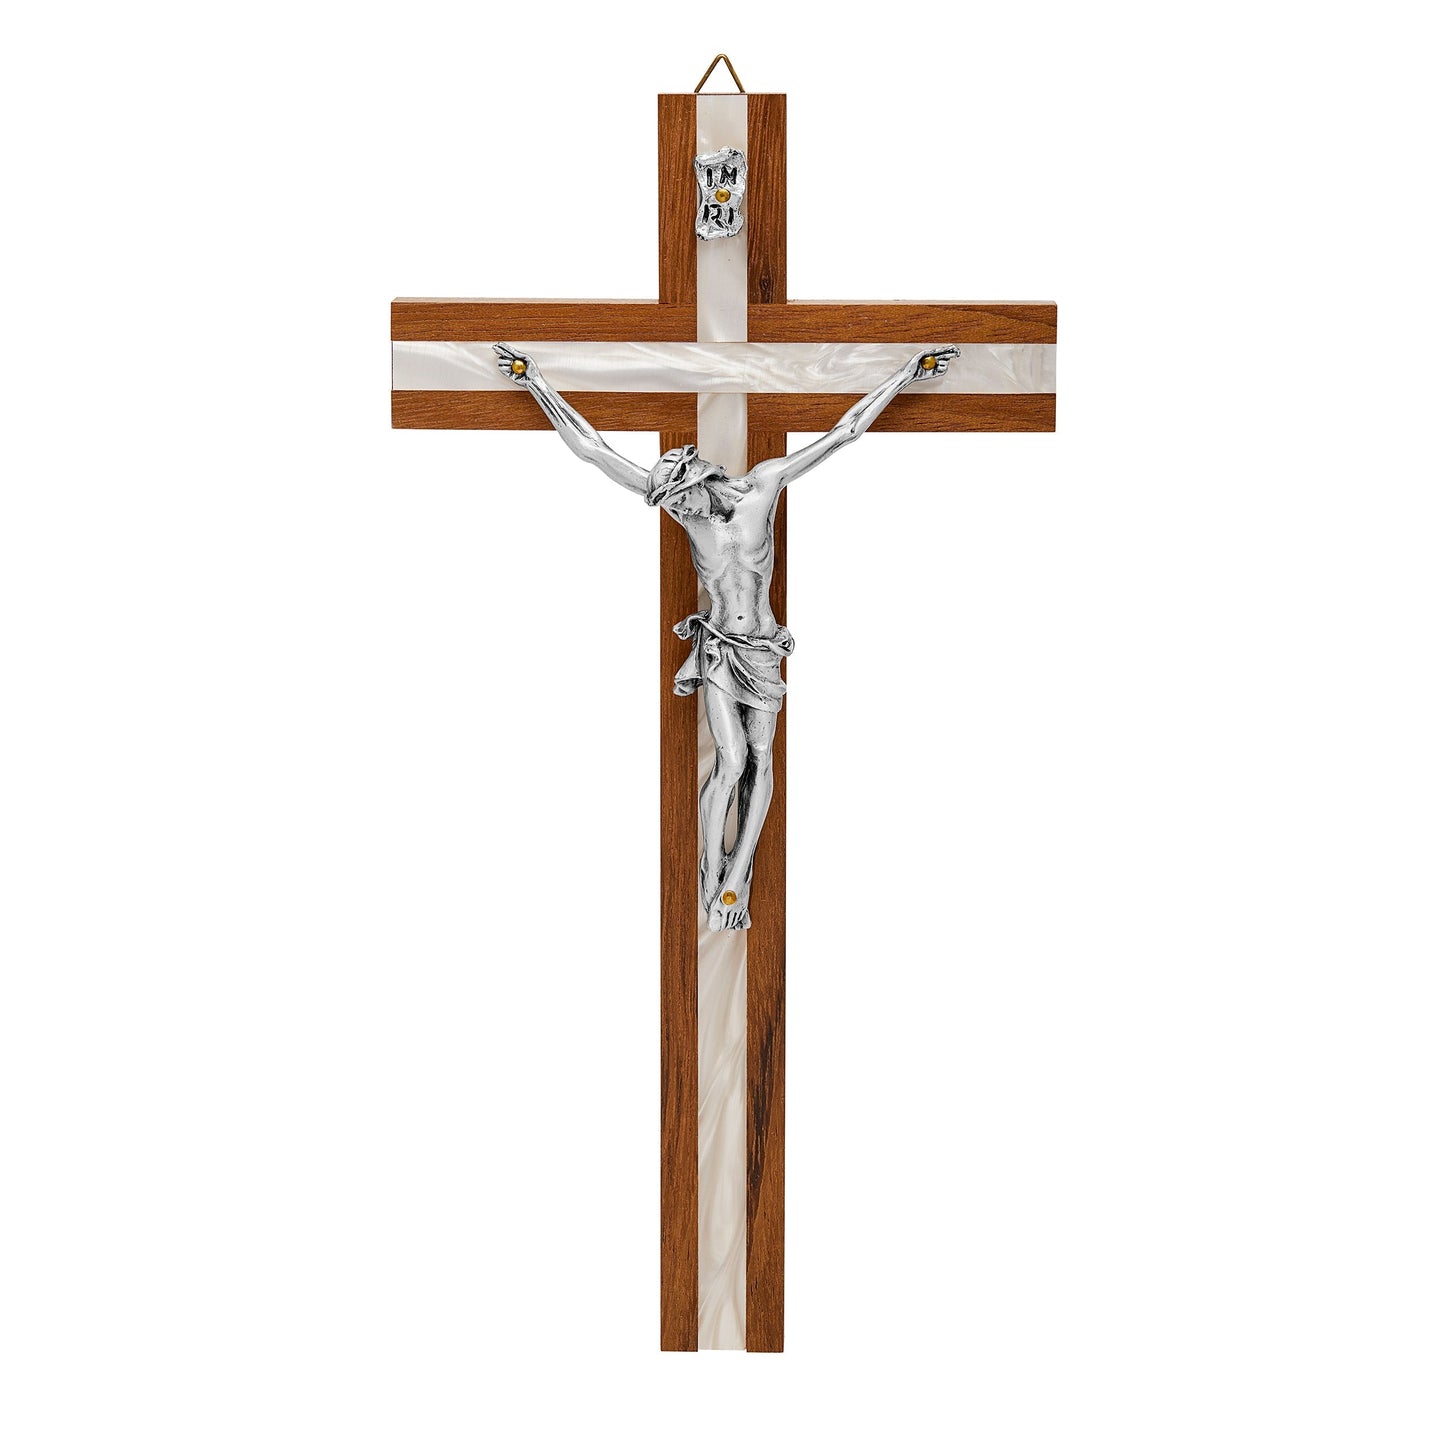 MONDO CATTOLICO Walnut Crucifix Inlaid With Mother-of-pearl